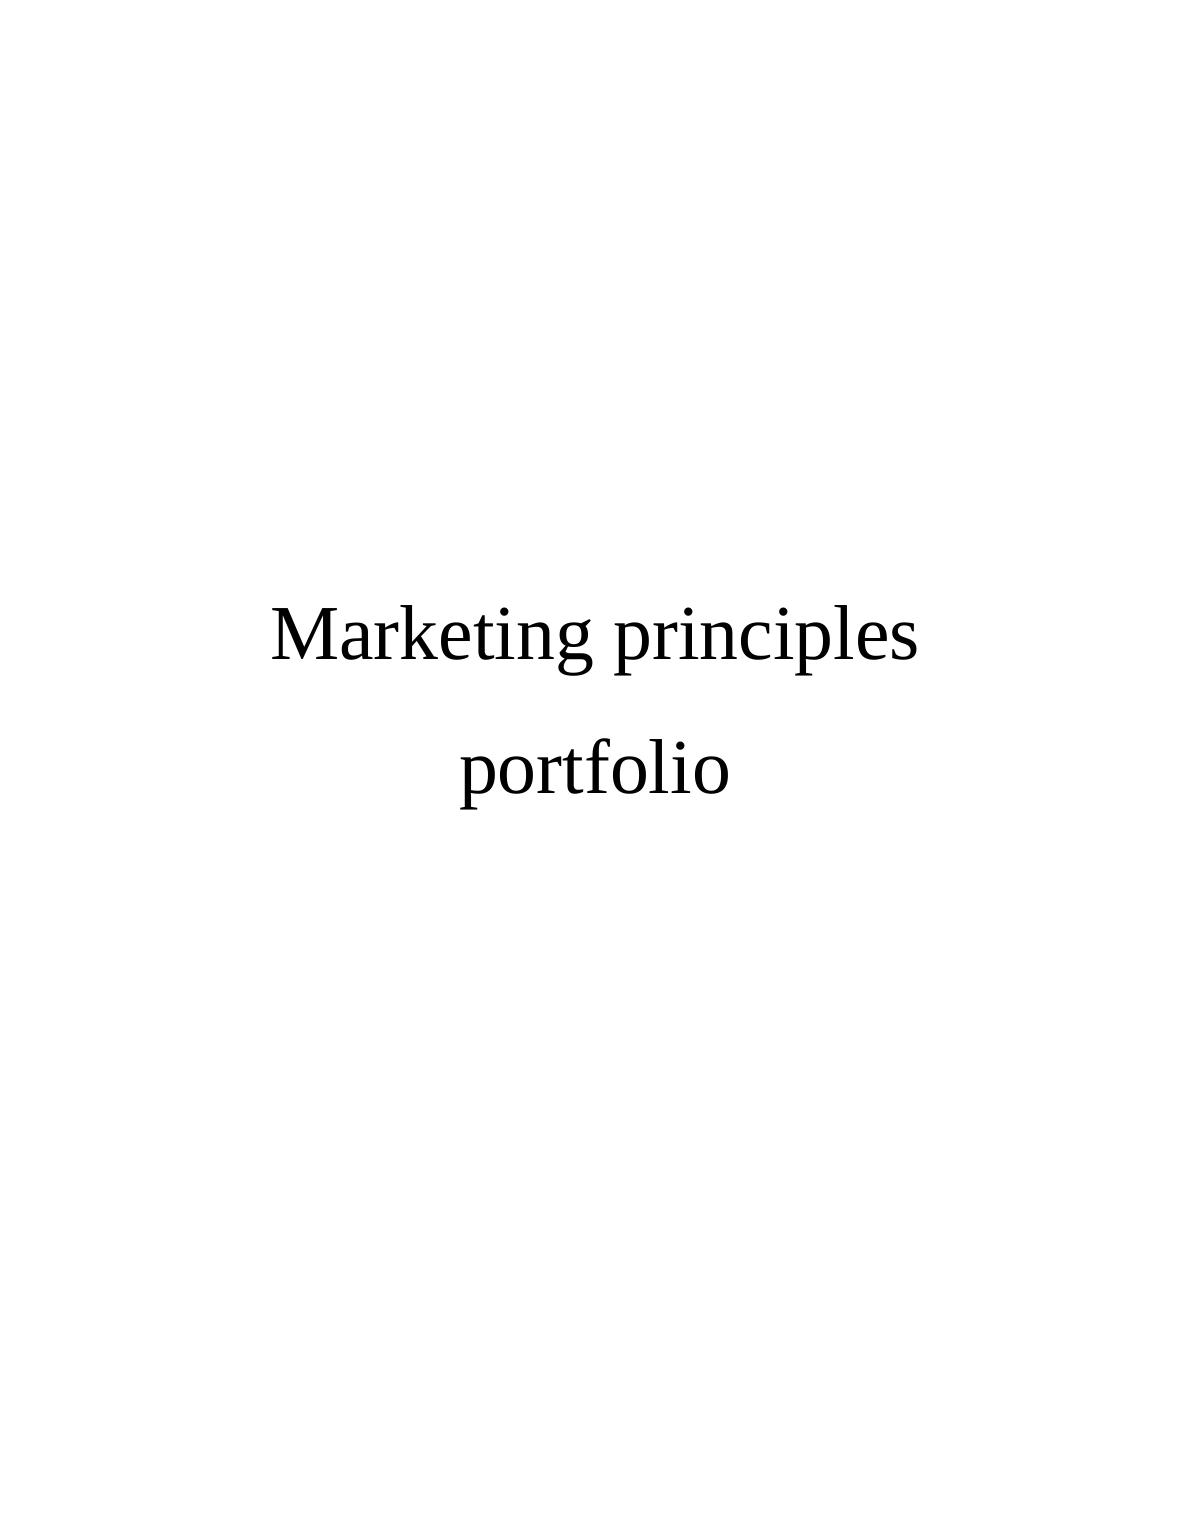 Marketing principles portfolio INTRODUCTION 3 MARKETING PLAN3 New product 4 Packaging4 Ingredients information4 Product development 6 Brand Appeal 6 Brand Attitudes and Trends 7 Targeting 8 Juice_1